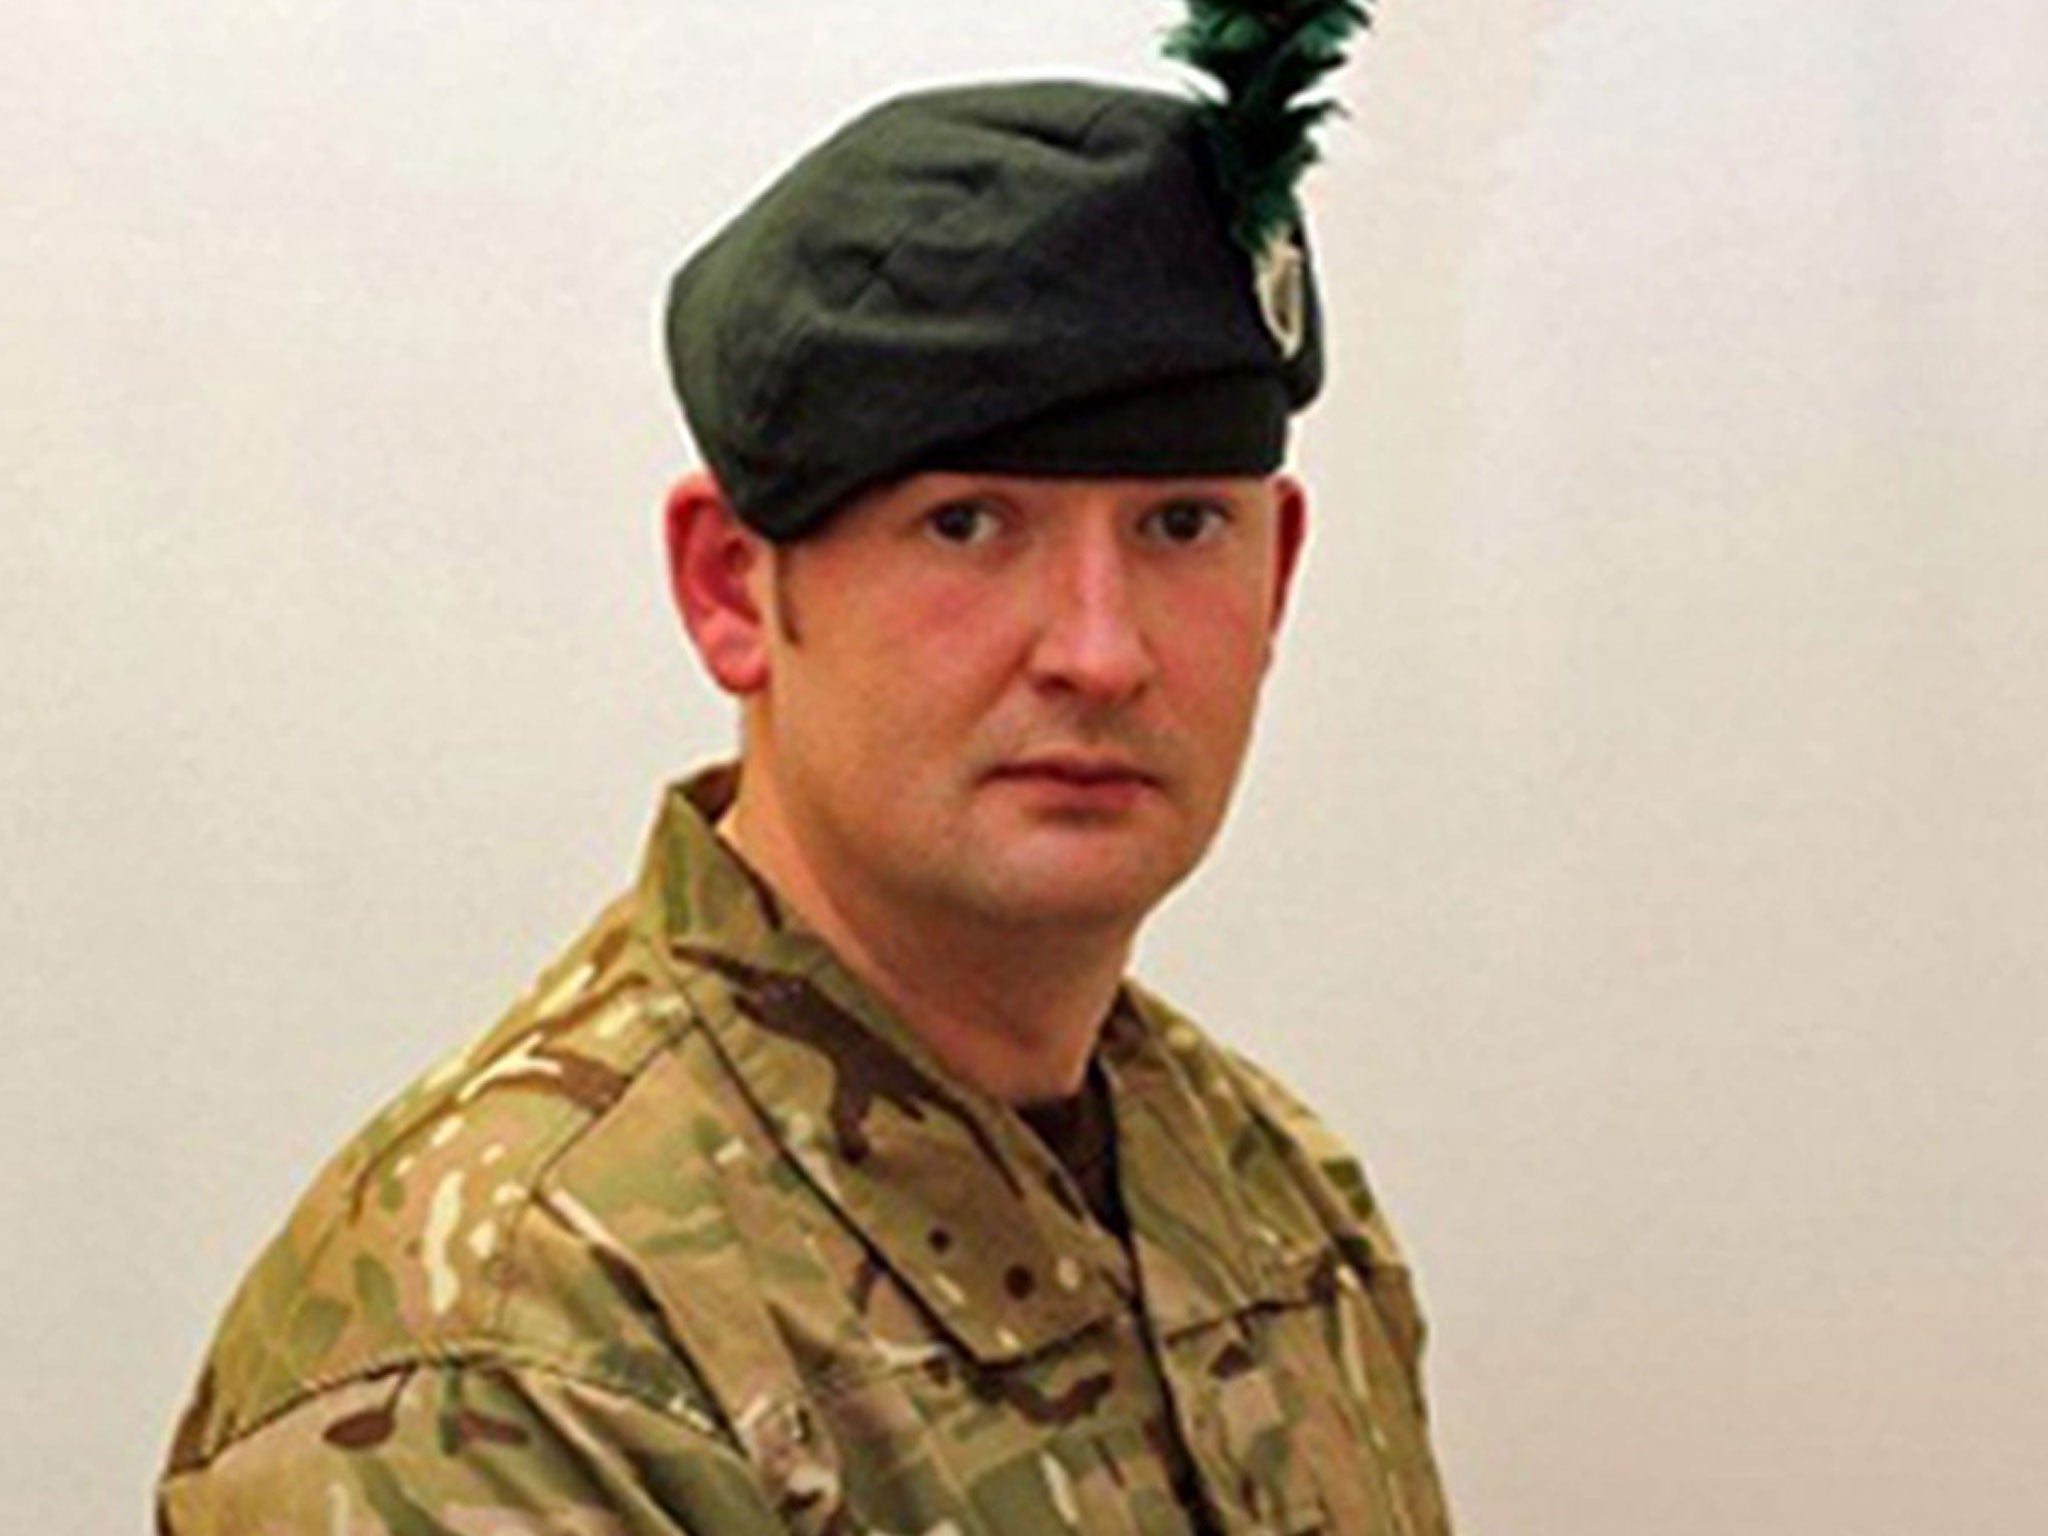 Corporal Geoffrey McNeill has been named as the soldier who died at Tern Hill Barracks in Shropshire